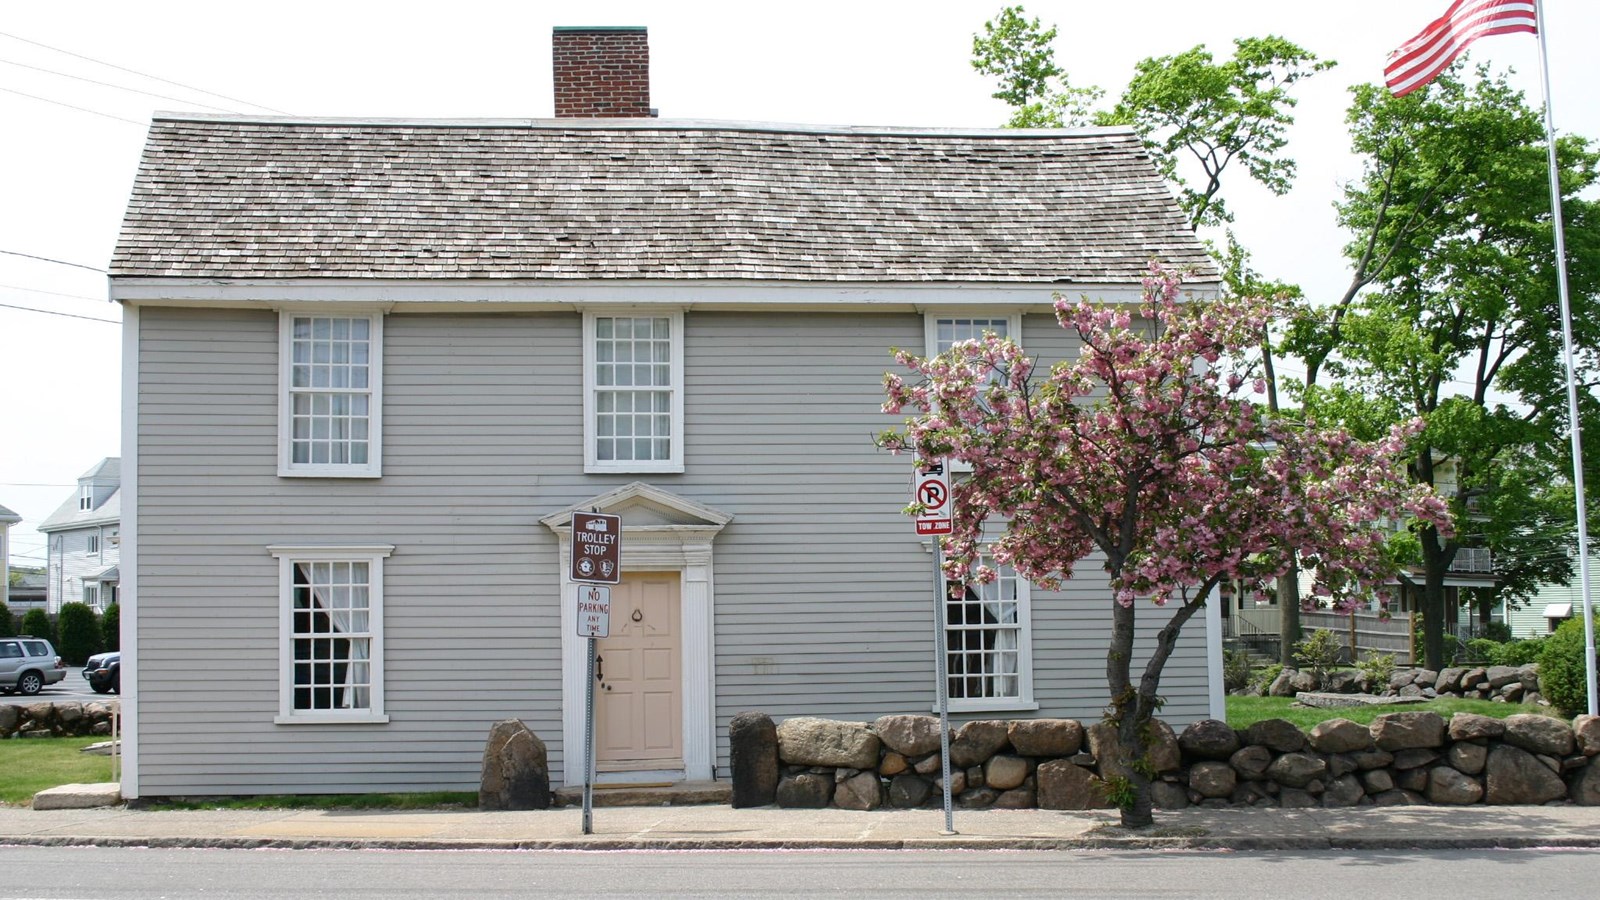 A grey, saltbox style home with a yellow door.